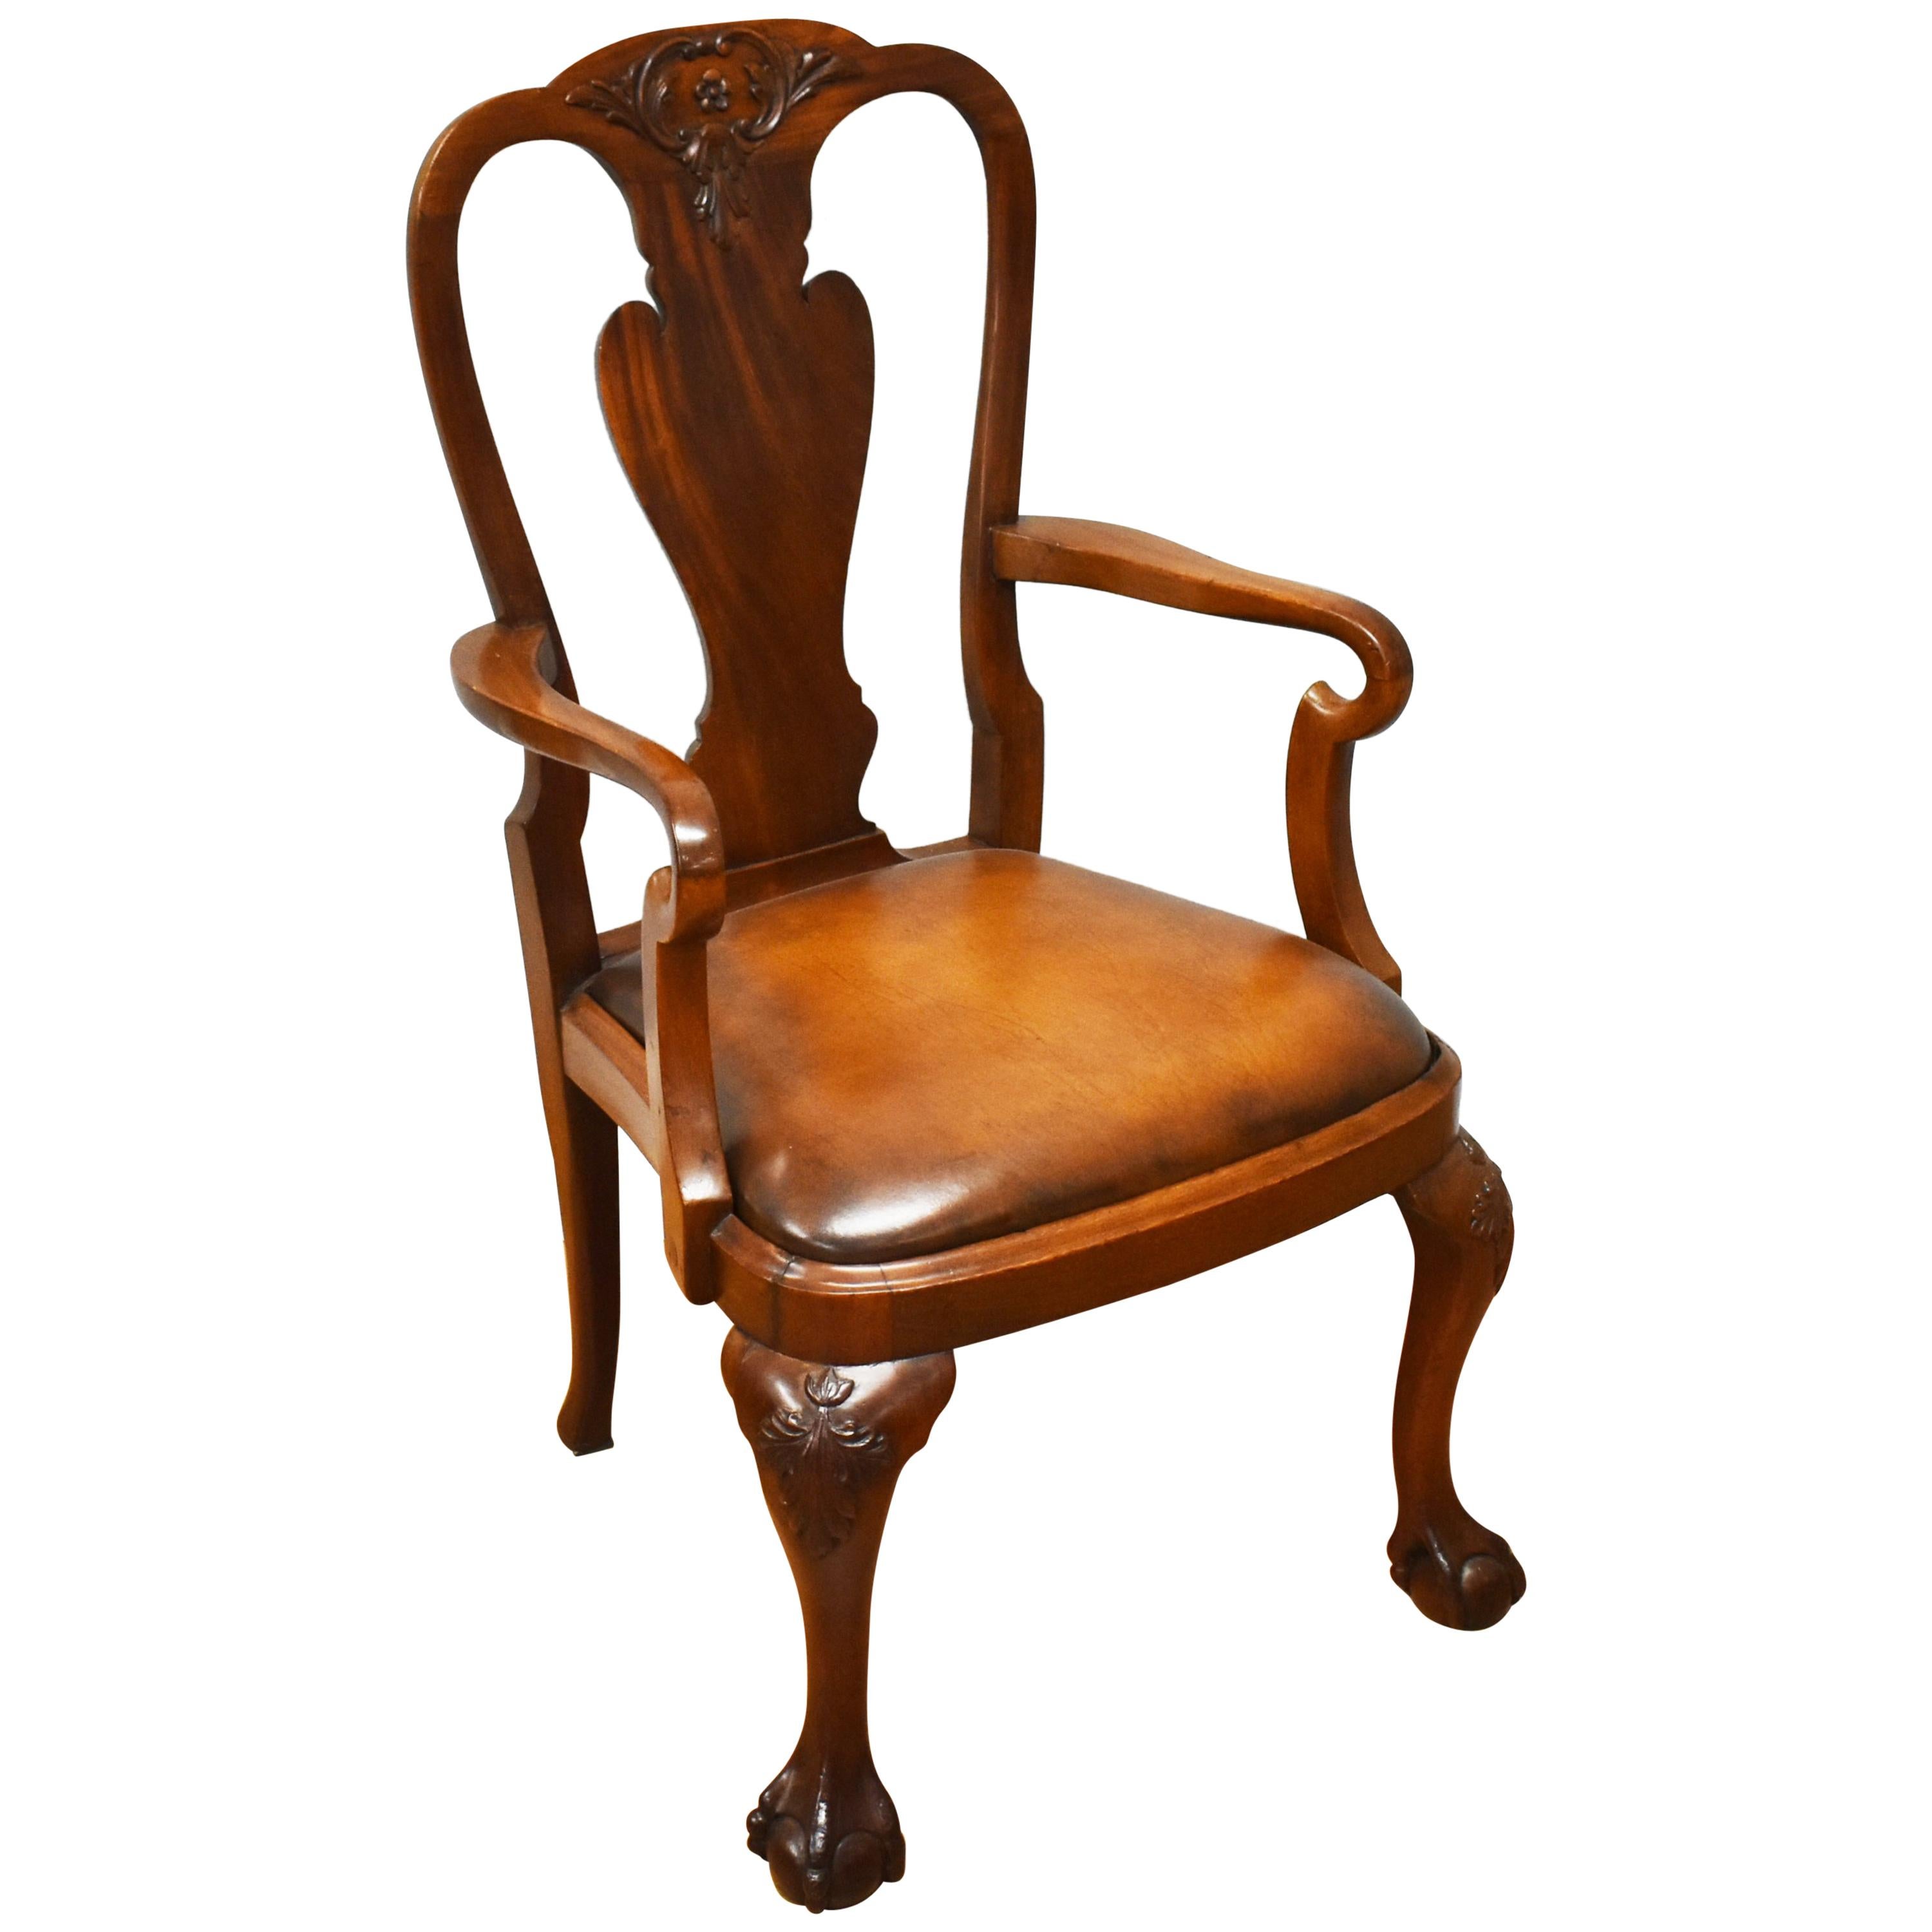 20th Century Queen Anne Revival Solid Mahogany Armchair